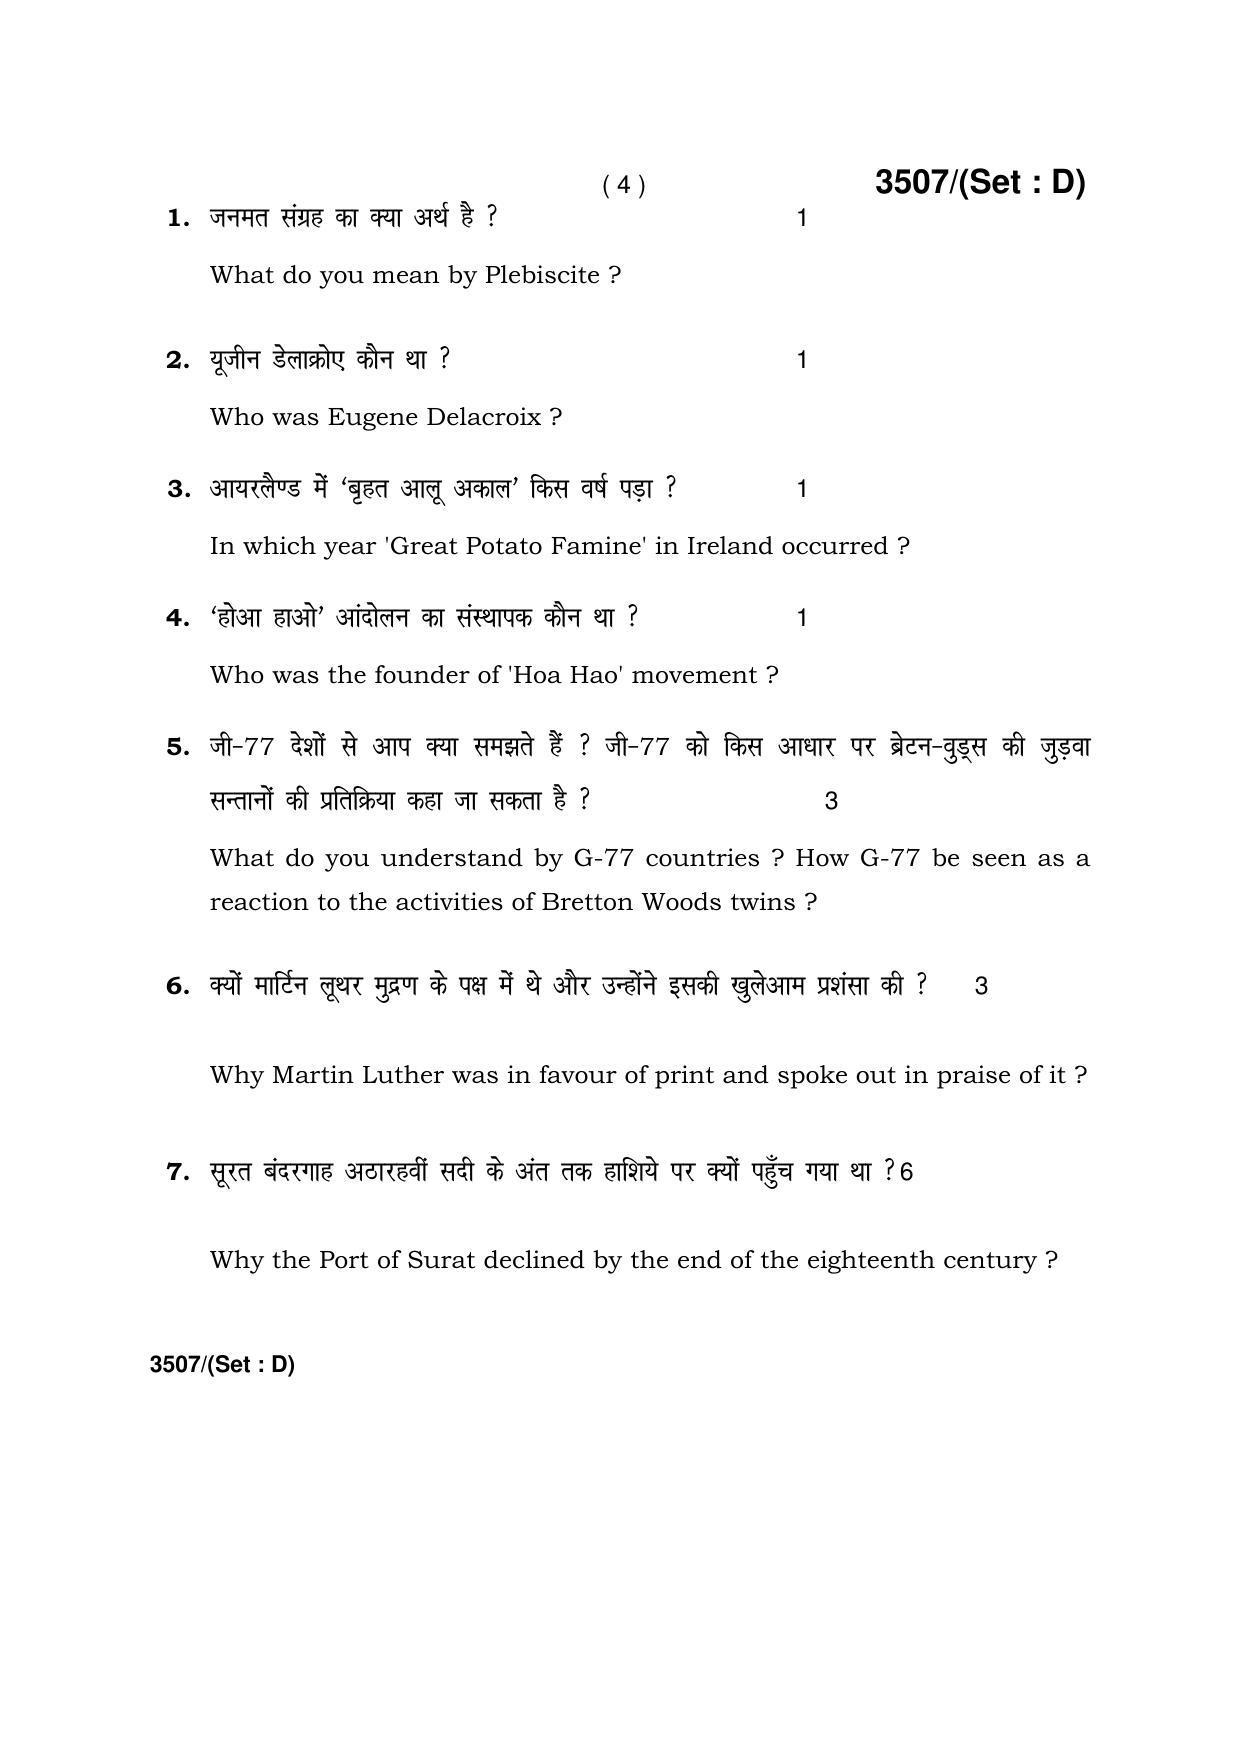 Haryana Board HBSE Class 10 Social Science -D 2018 Question Paper - Page 4